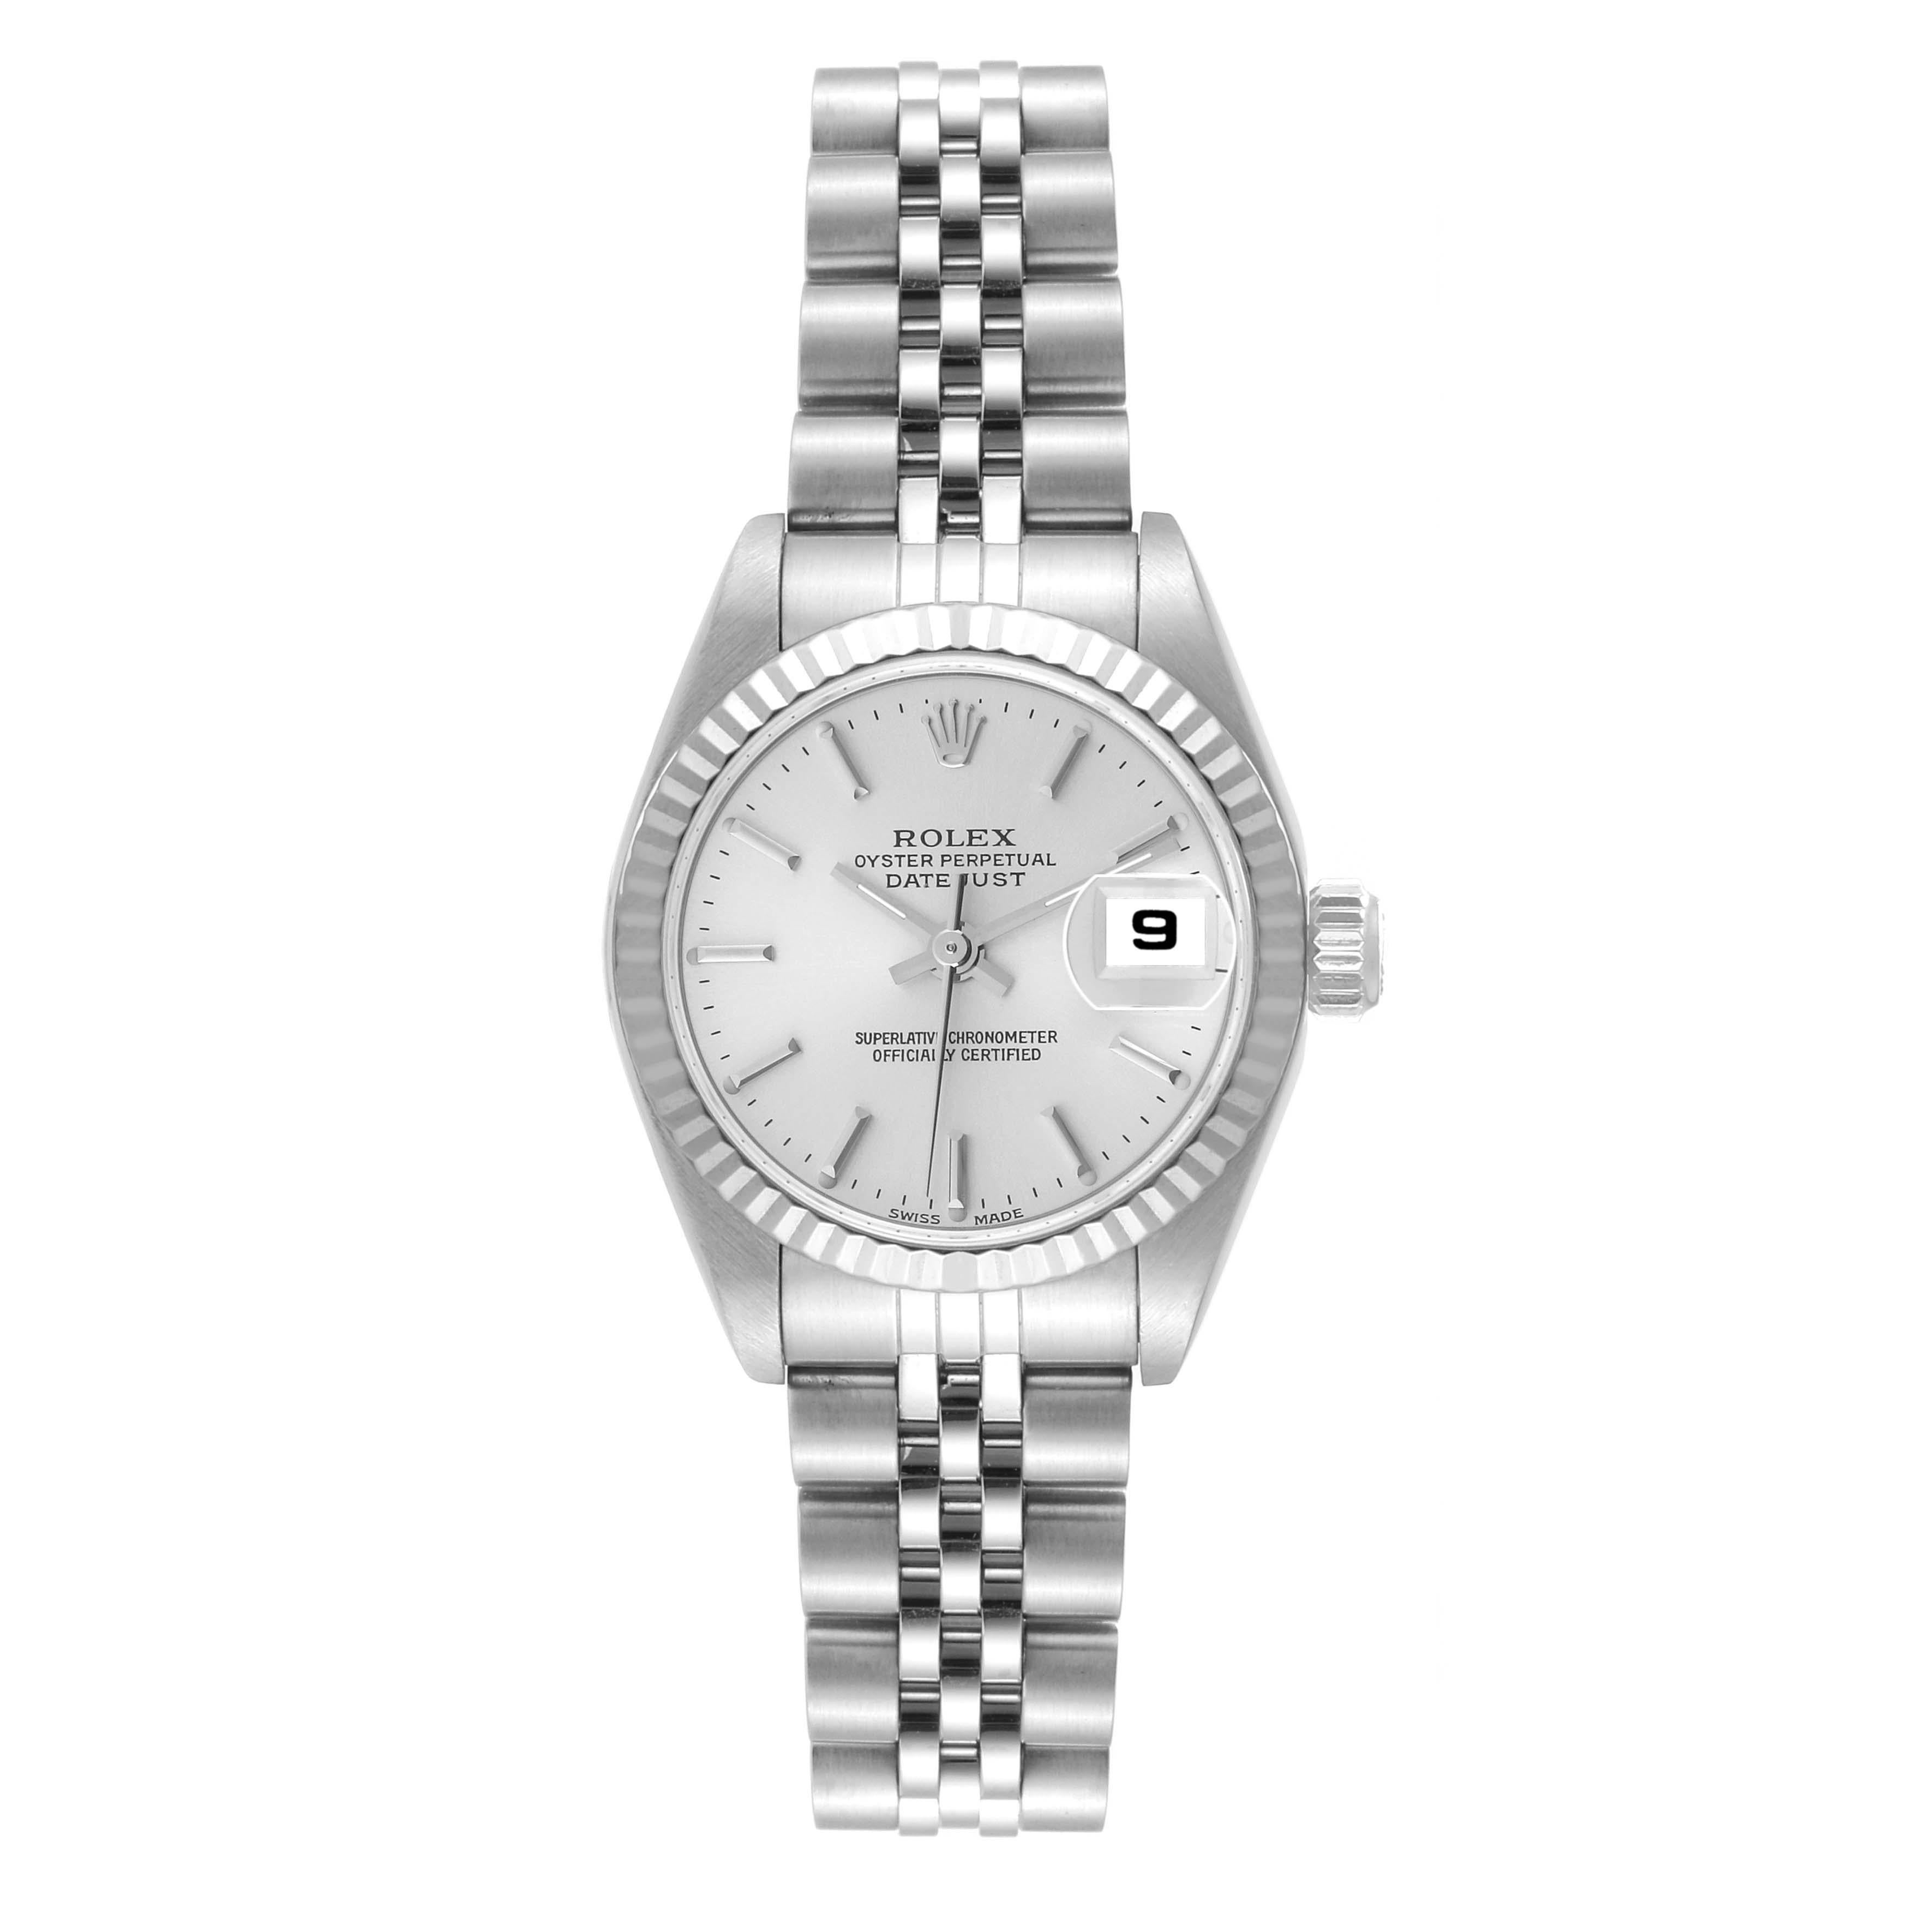 Rolex Datejust 26 Steel White Gold Silver Dial Ladies Watch 79174. Officially certified chronometer automatic self-winding movement. Stainless steel oyster case 26.0 mm in diameter. Rolex logo on a crown. 18k white gold fluted bezel. Scratch